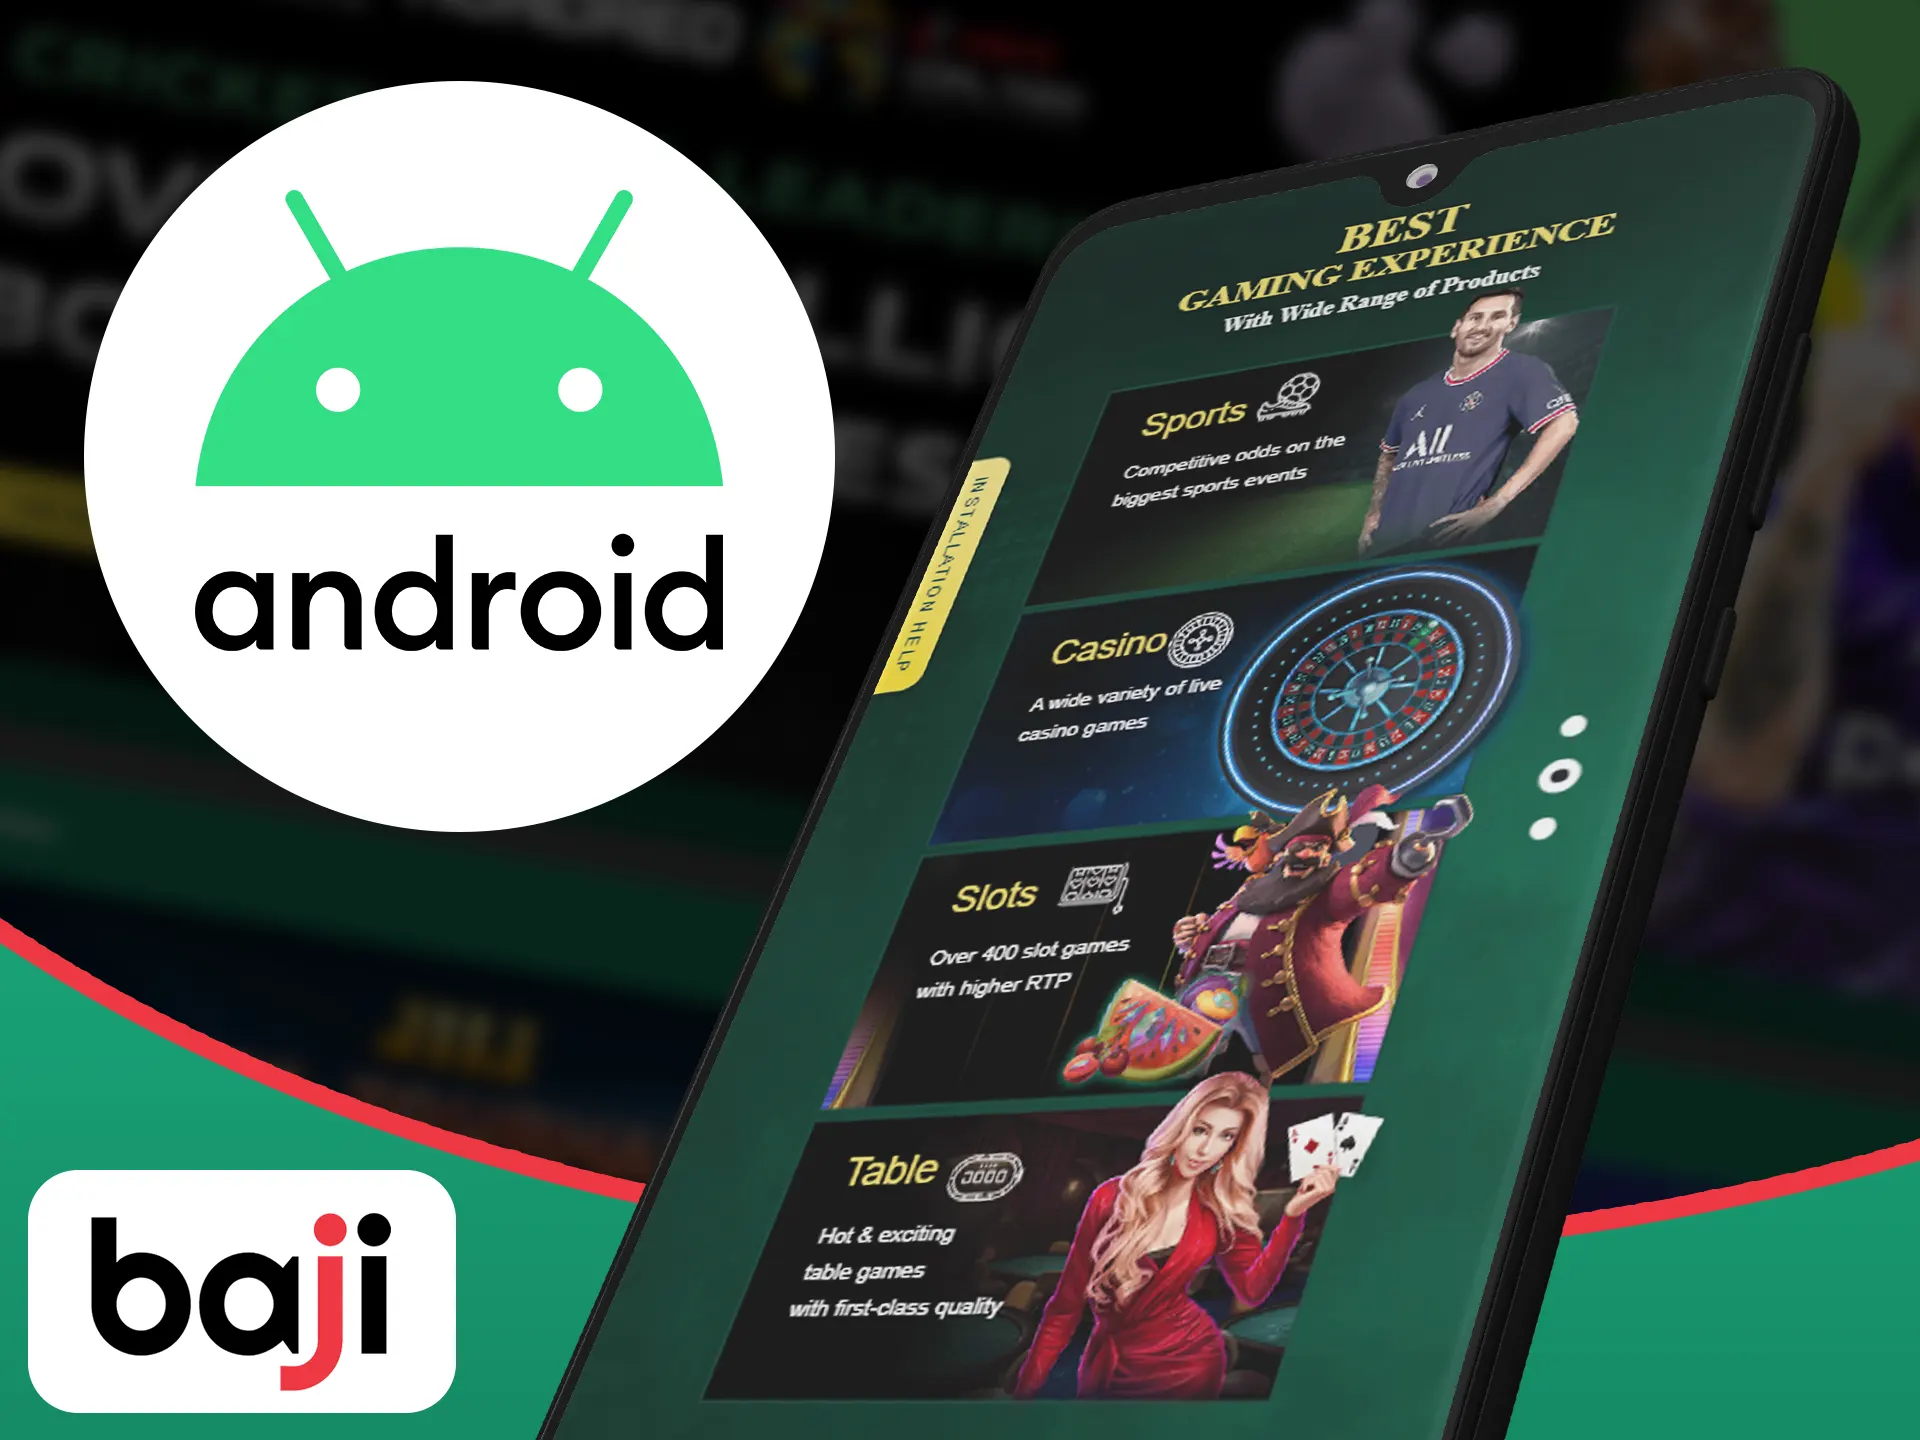 The Baji app supports many Android devices.